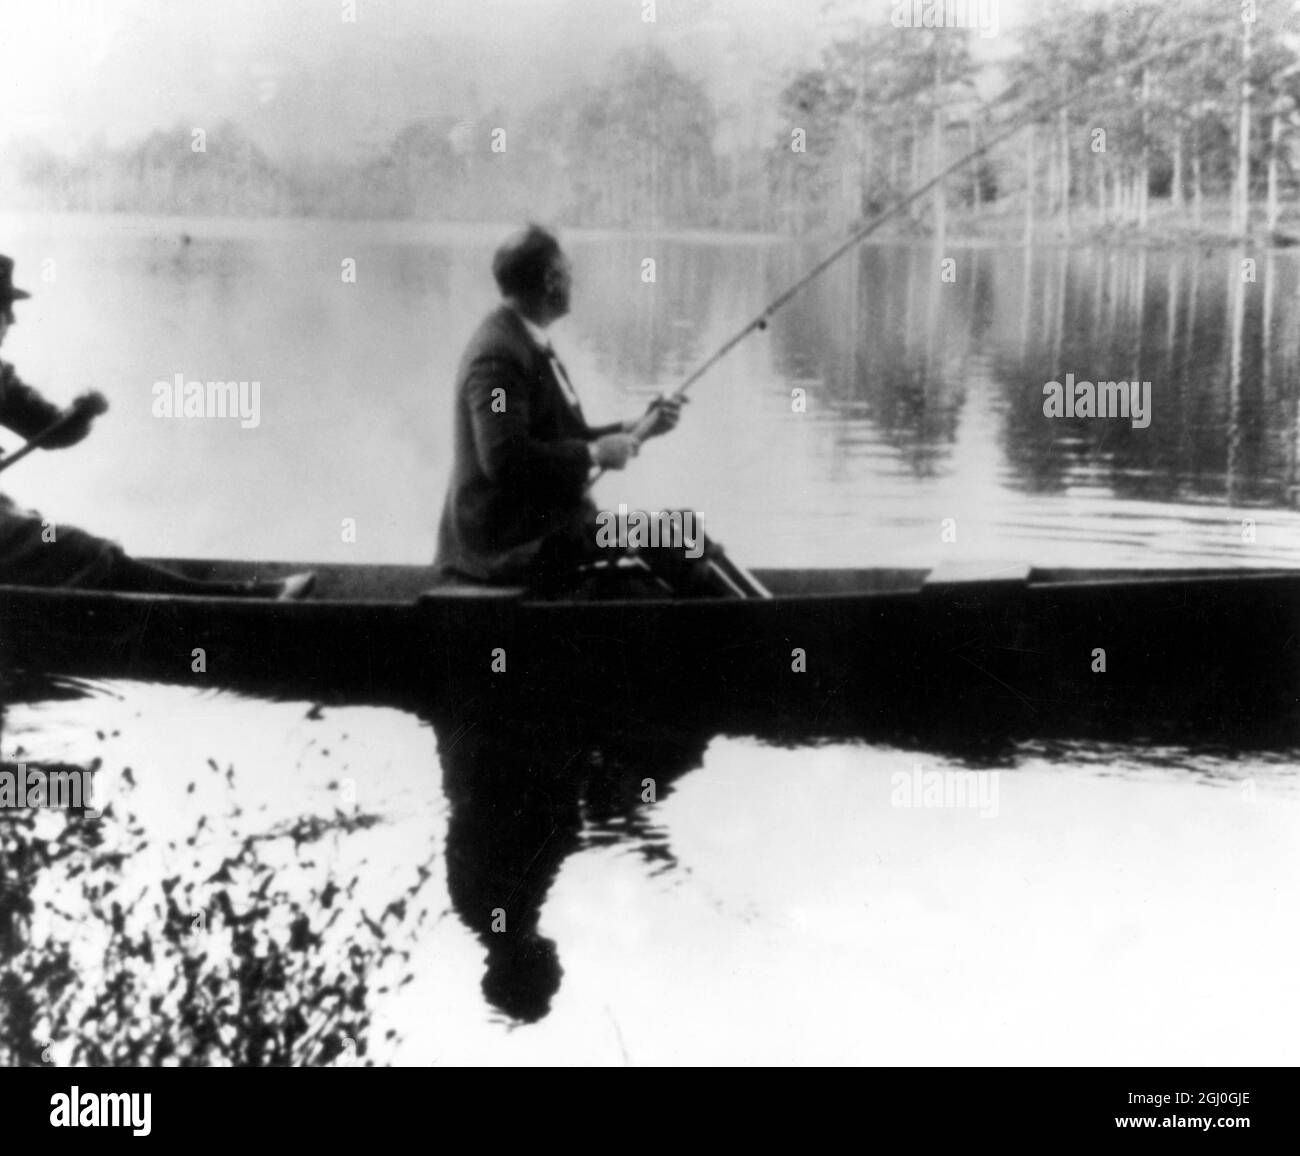 Mr Franklyn Delano Roosevelt (1882-1945), fishing in Warm Springs. He was President of the USA 1933-1945, a Democrat. Served as Governor of New York 1929-1933, becoming president during the Depression. Stock Photo